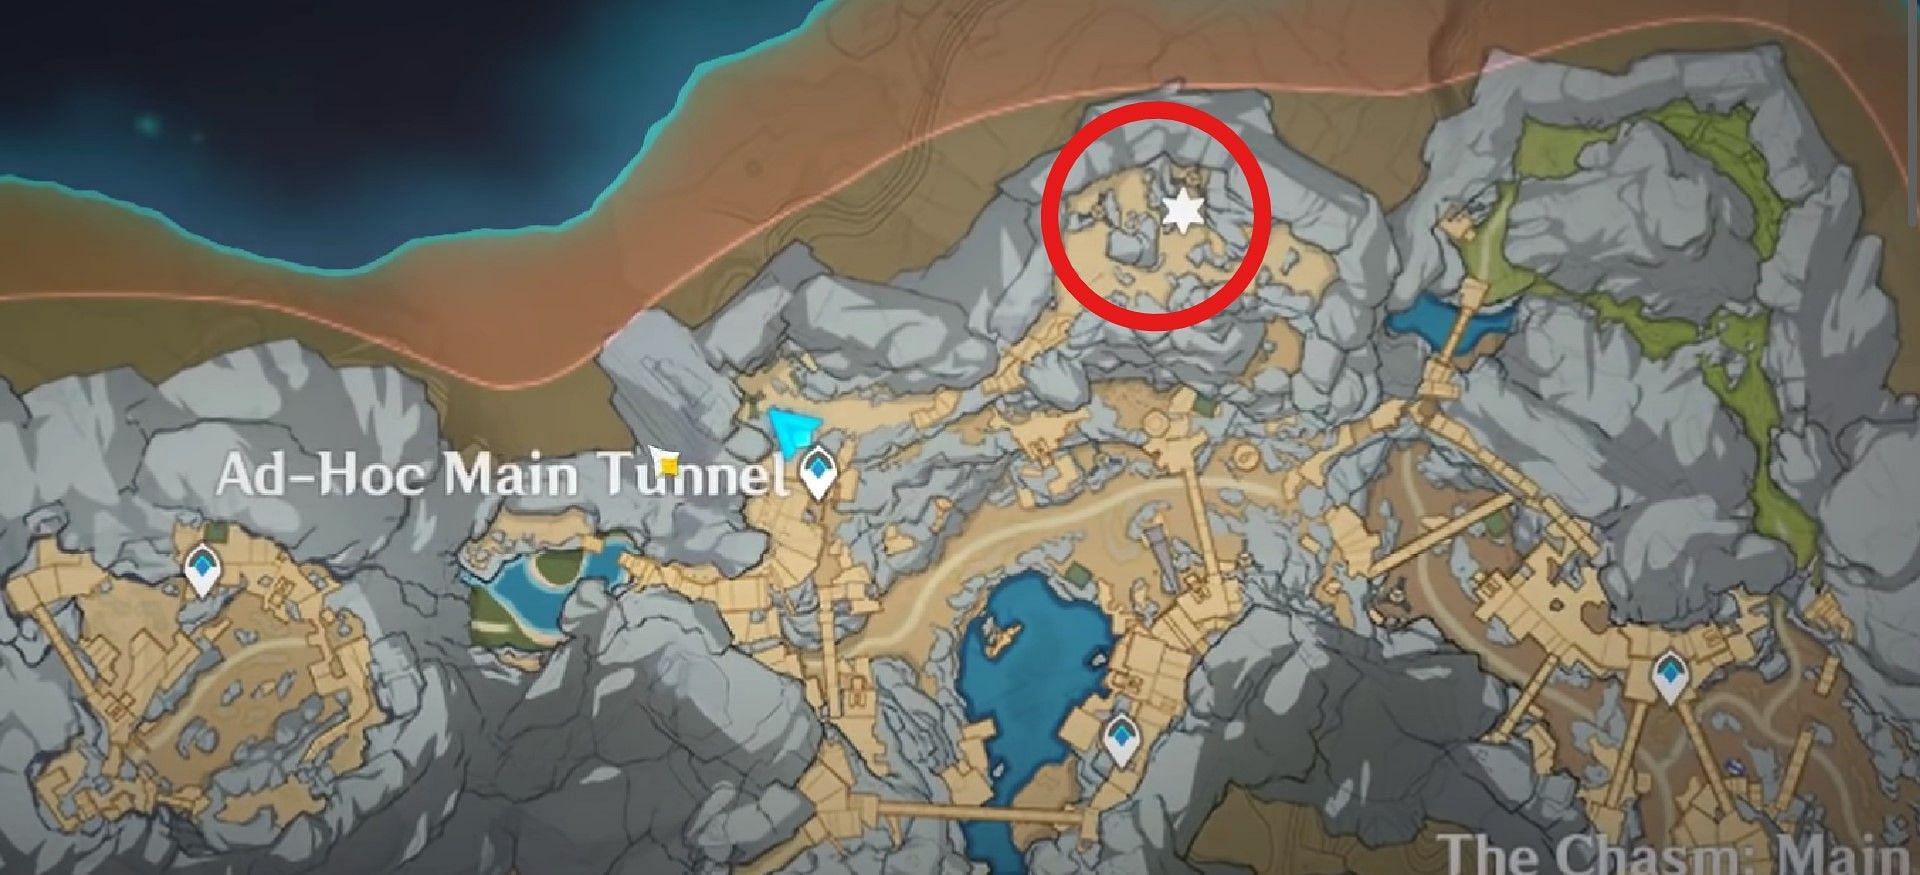 Location of first map fragment to unlock the gate in The Chasm: Underground Mines (Image via Genshin Impact)